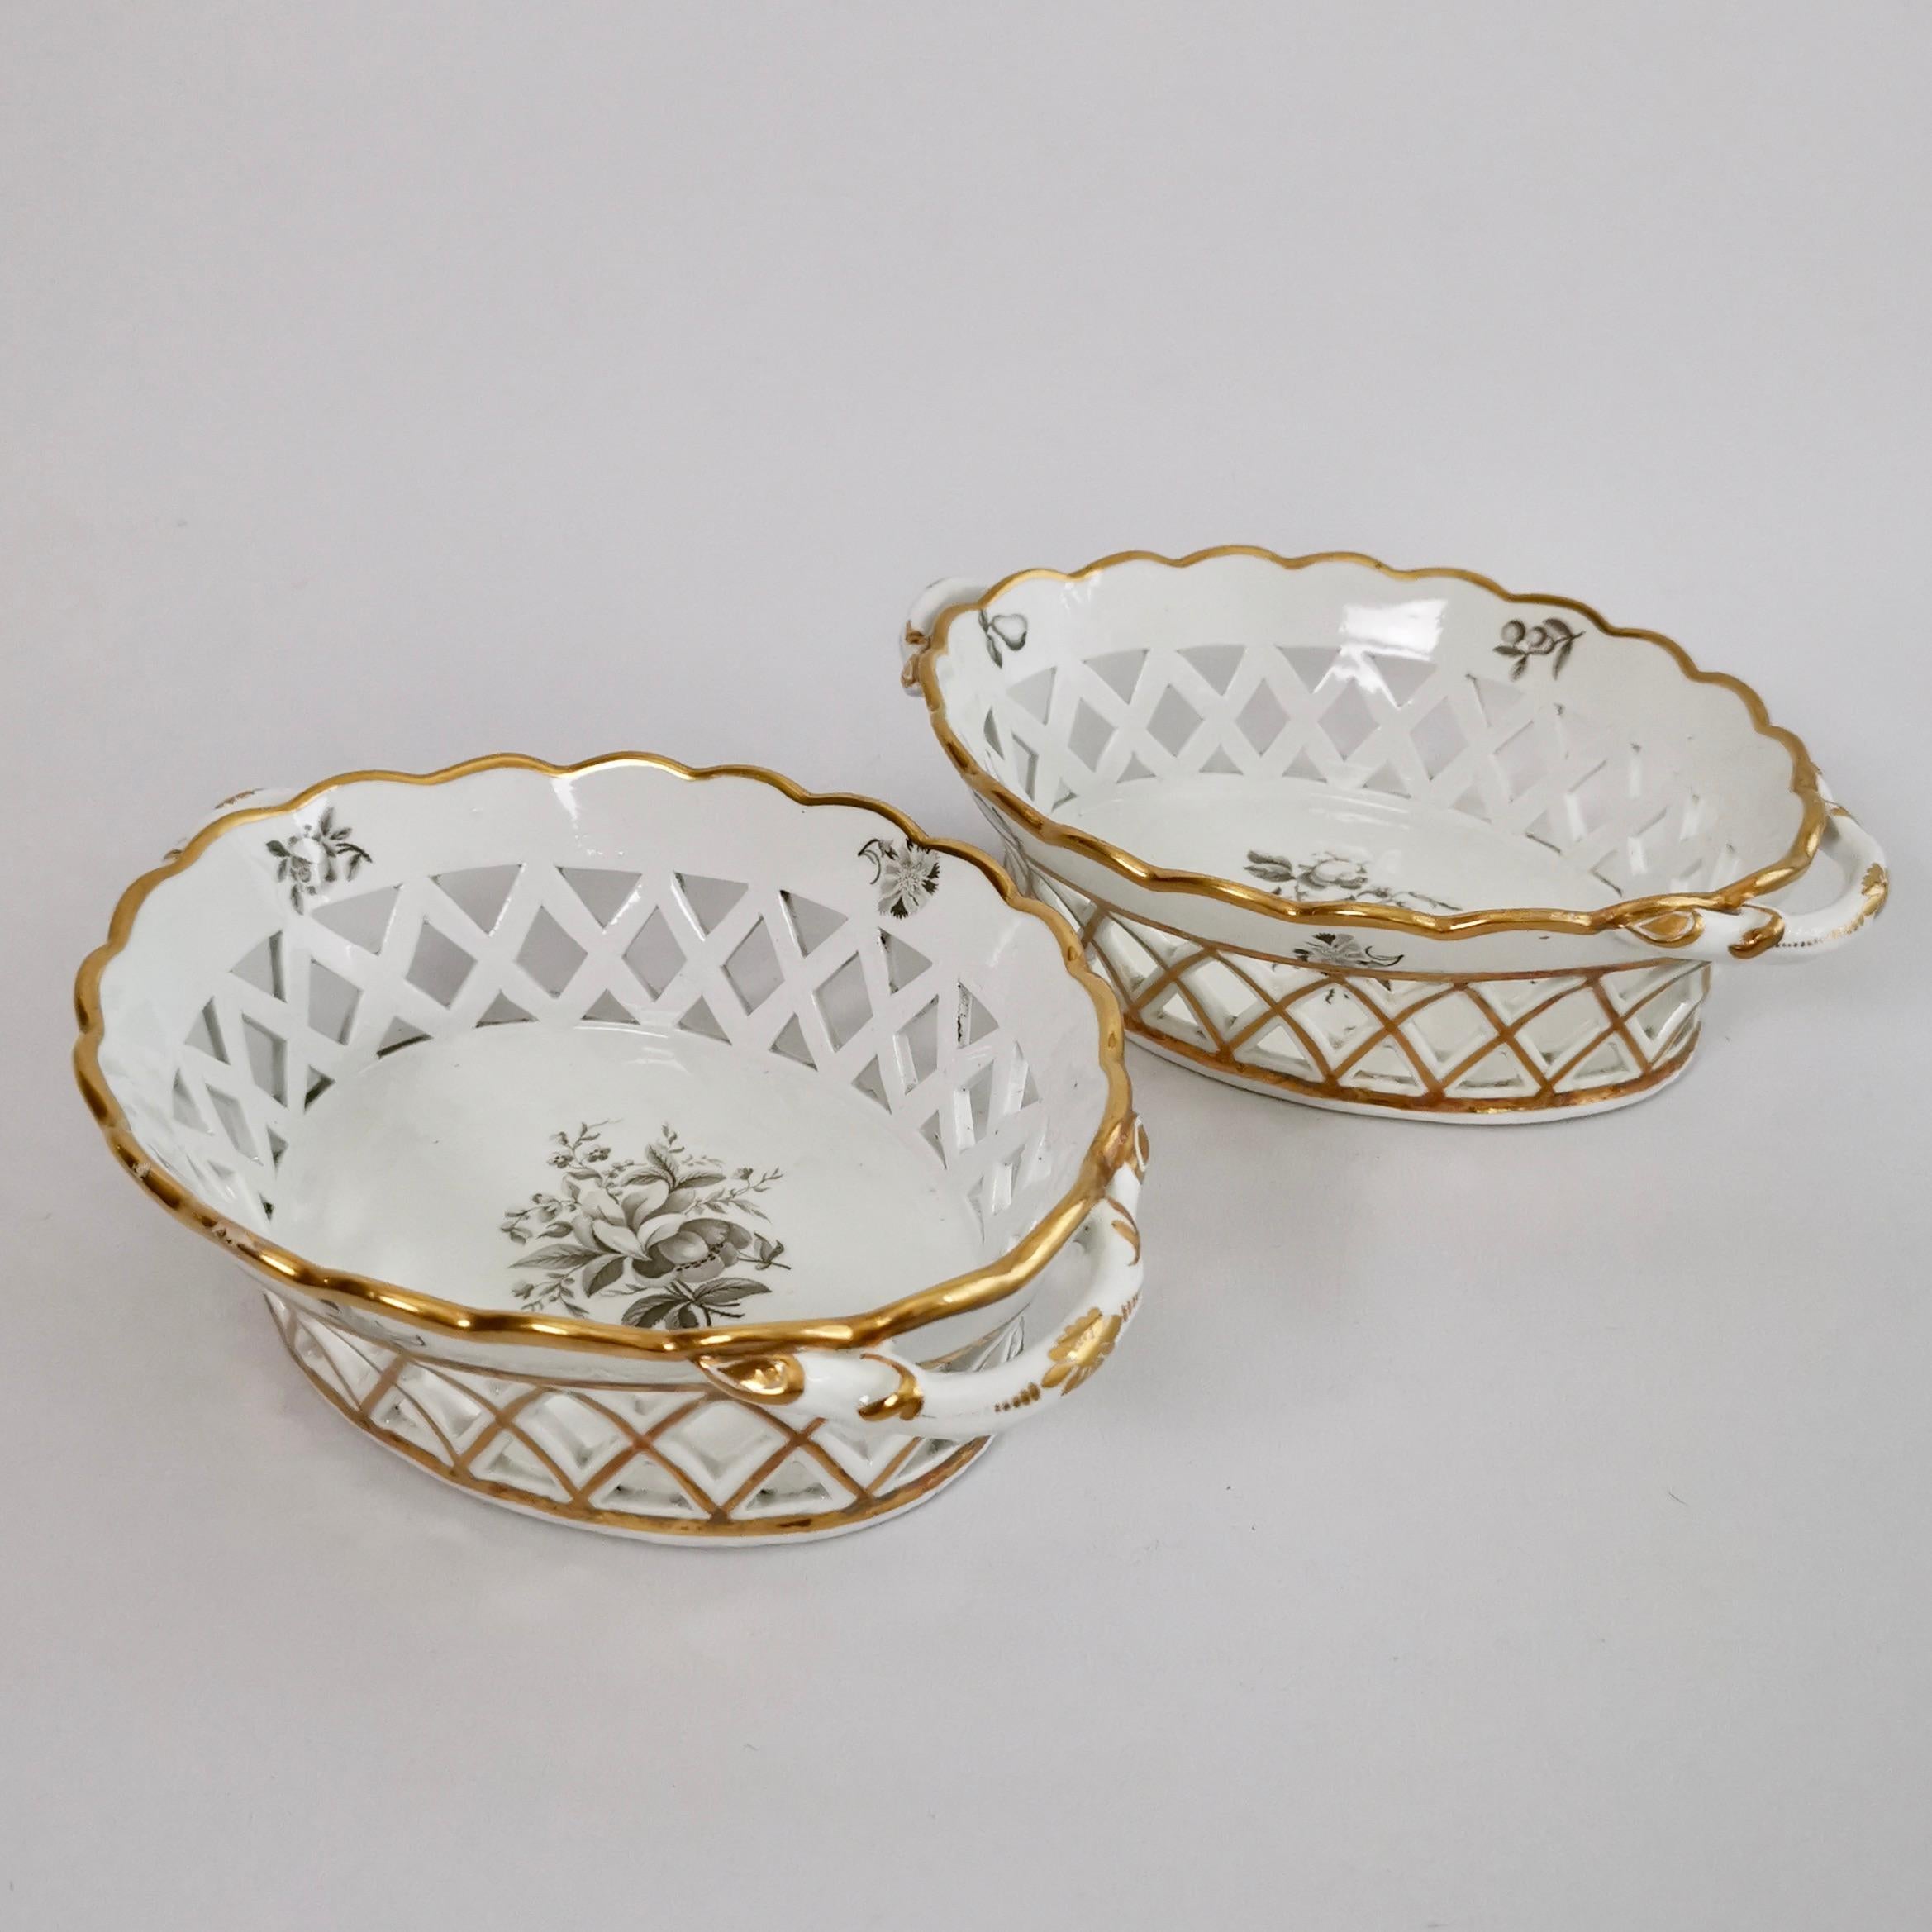 English Spode Pair of Porcelain Bread Baskets, White with Bat Printed Flowers, ca 1810